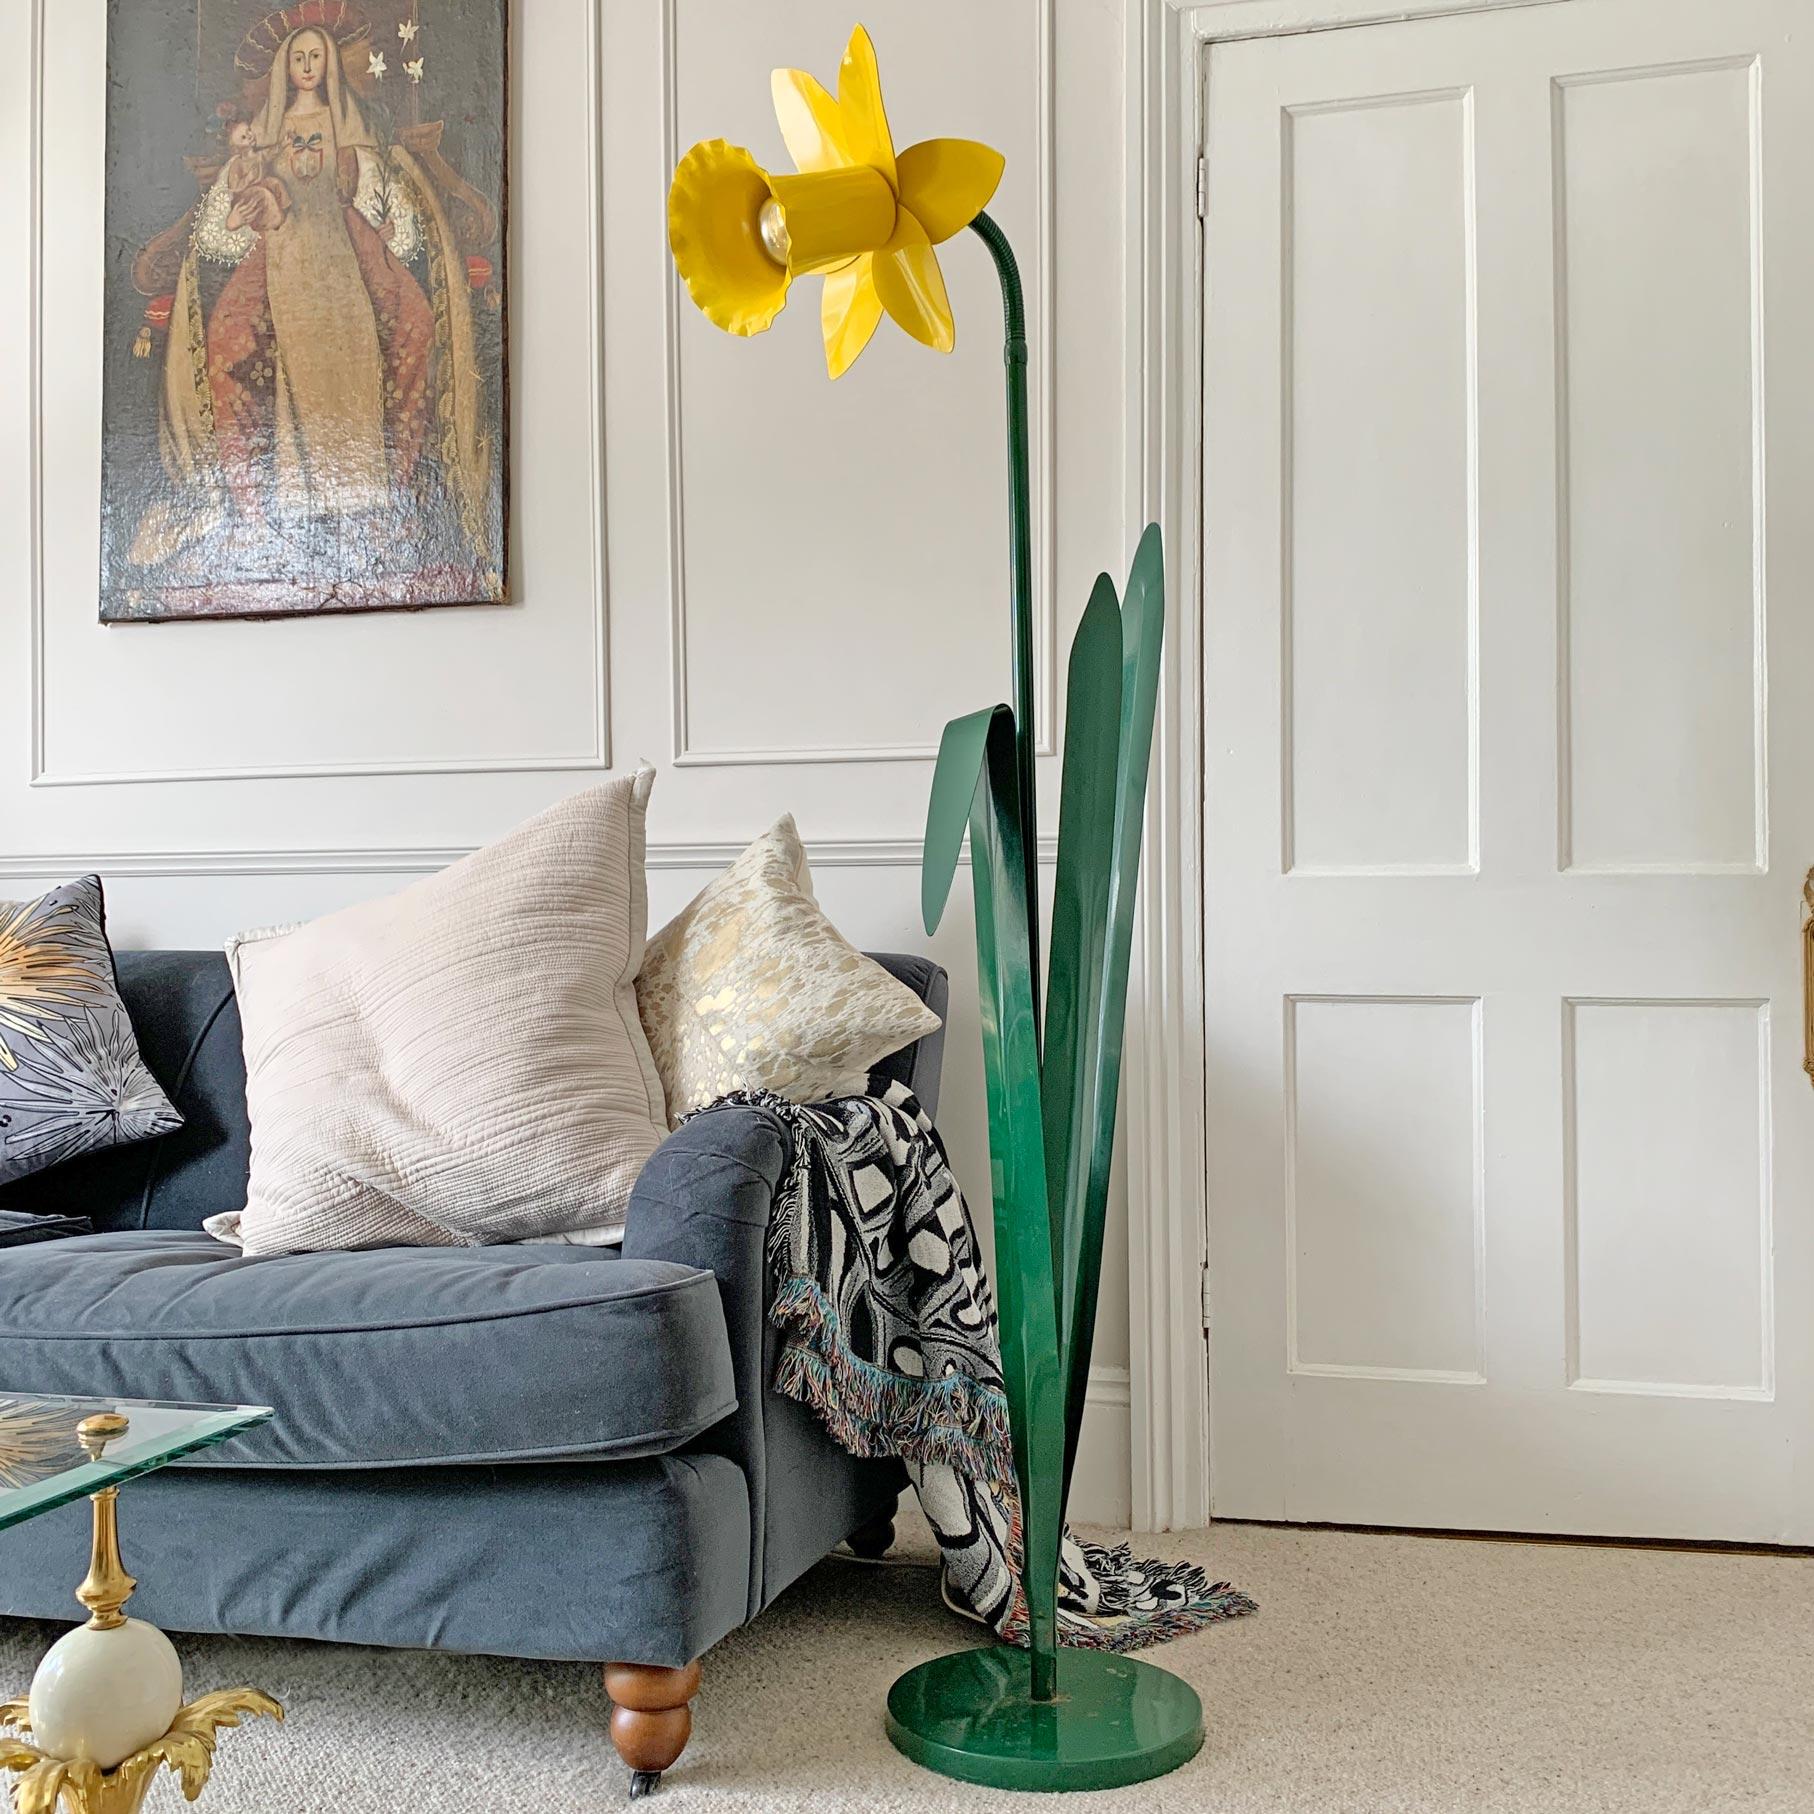 A very large and rare Bliss Daffodil Floor Lamp.

Iconic bright yellow Daffodil Floor Lamp designed by Bliss in the 1980’s. This adjustable neck designer lamp in painted steel is from the UK and is in exceptional condition for it’s age. Small area